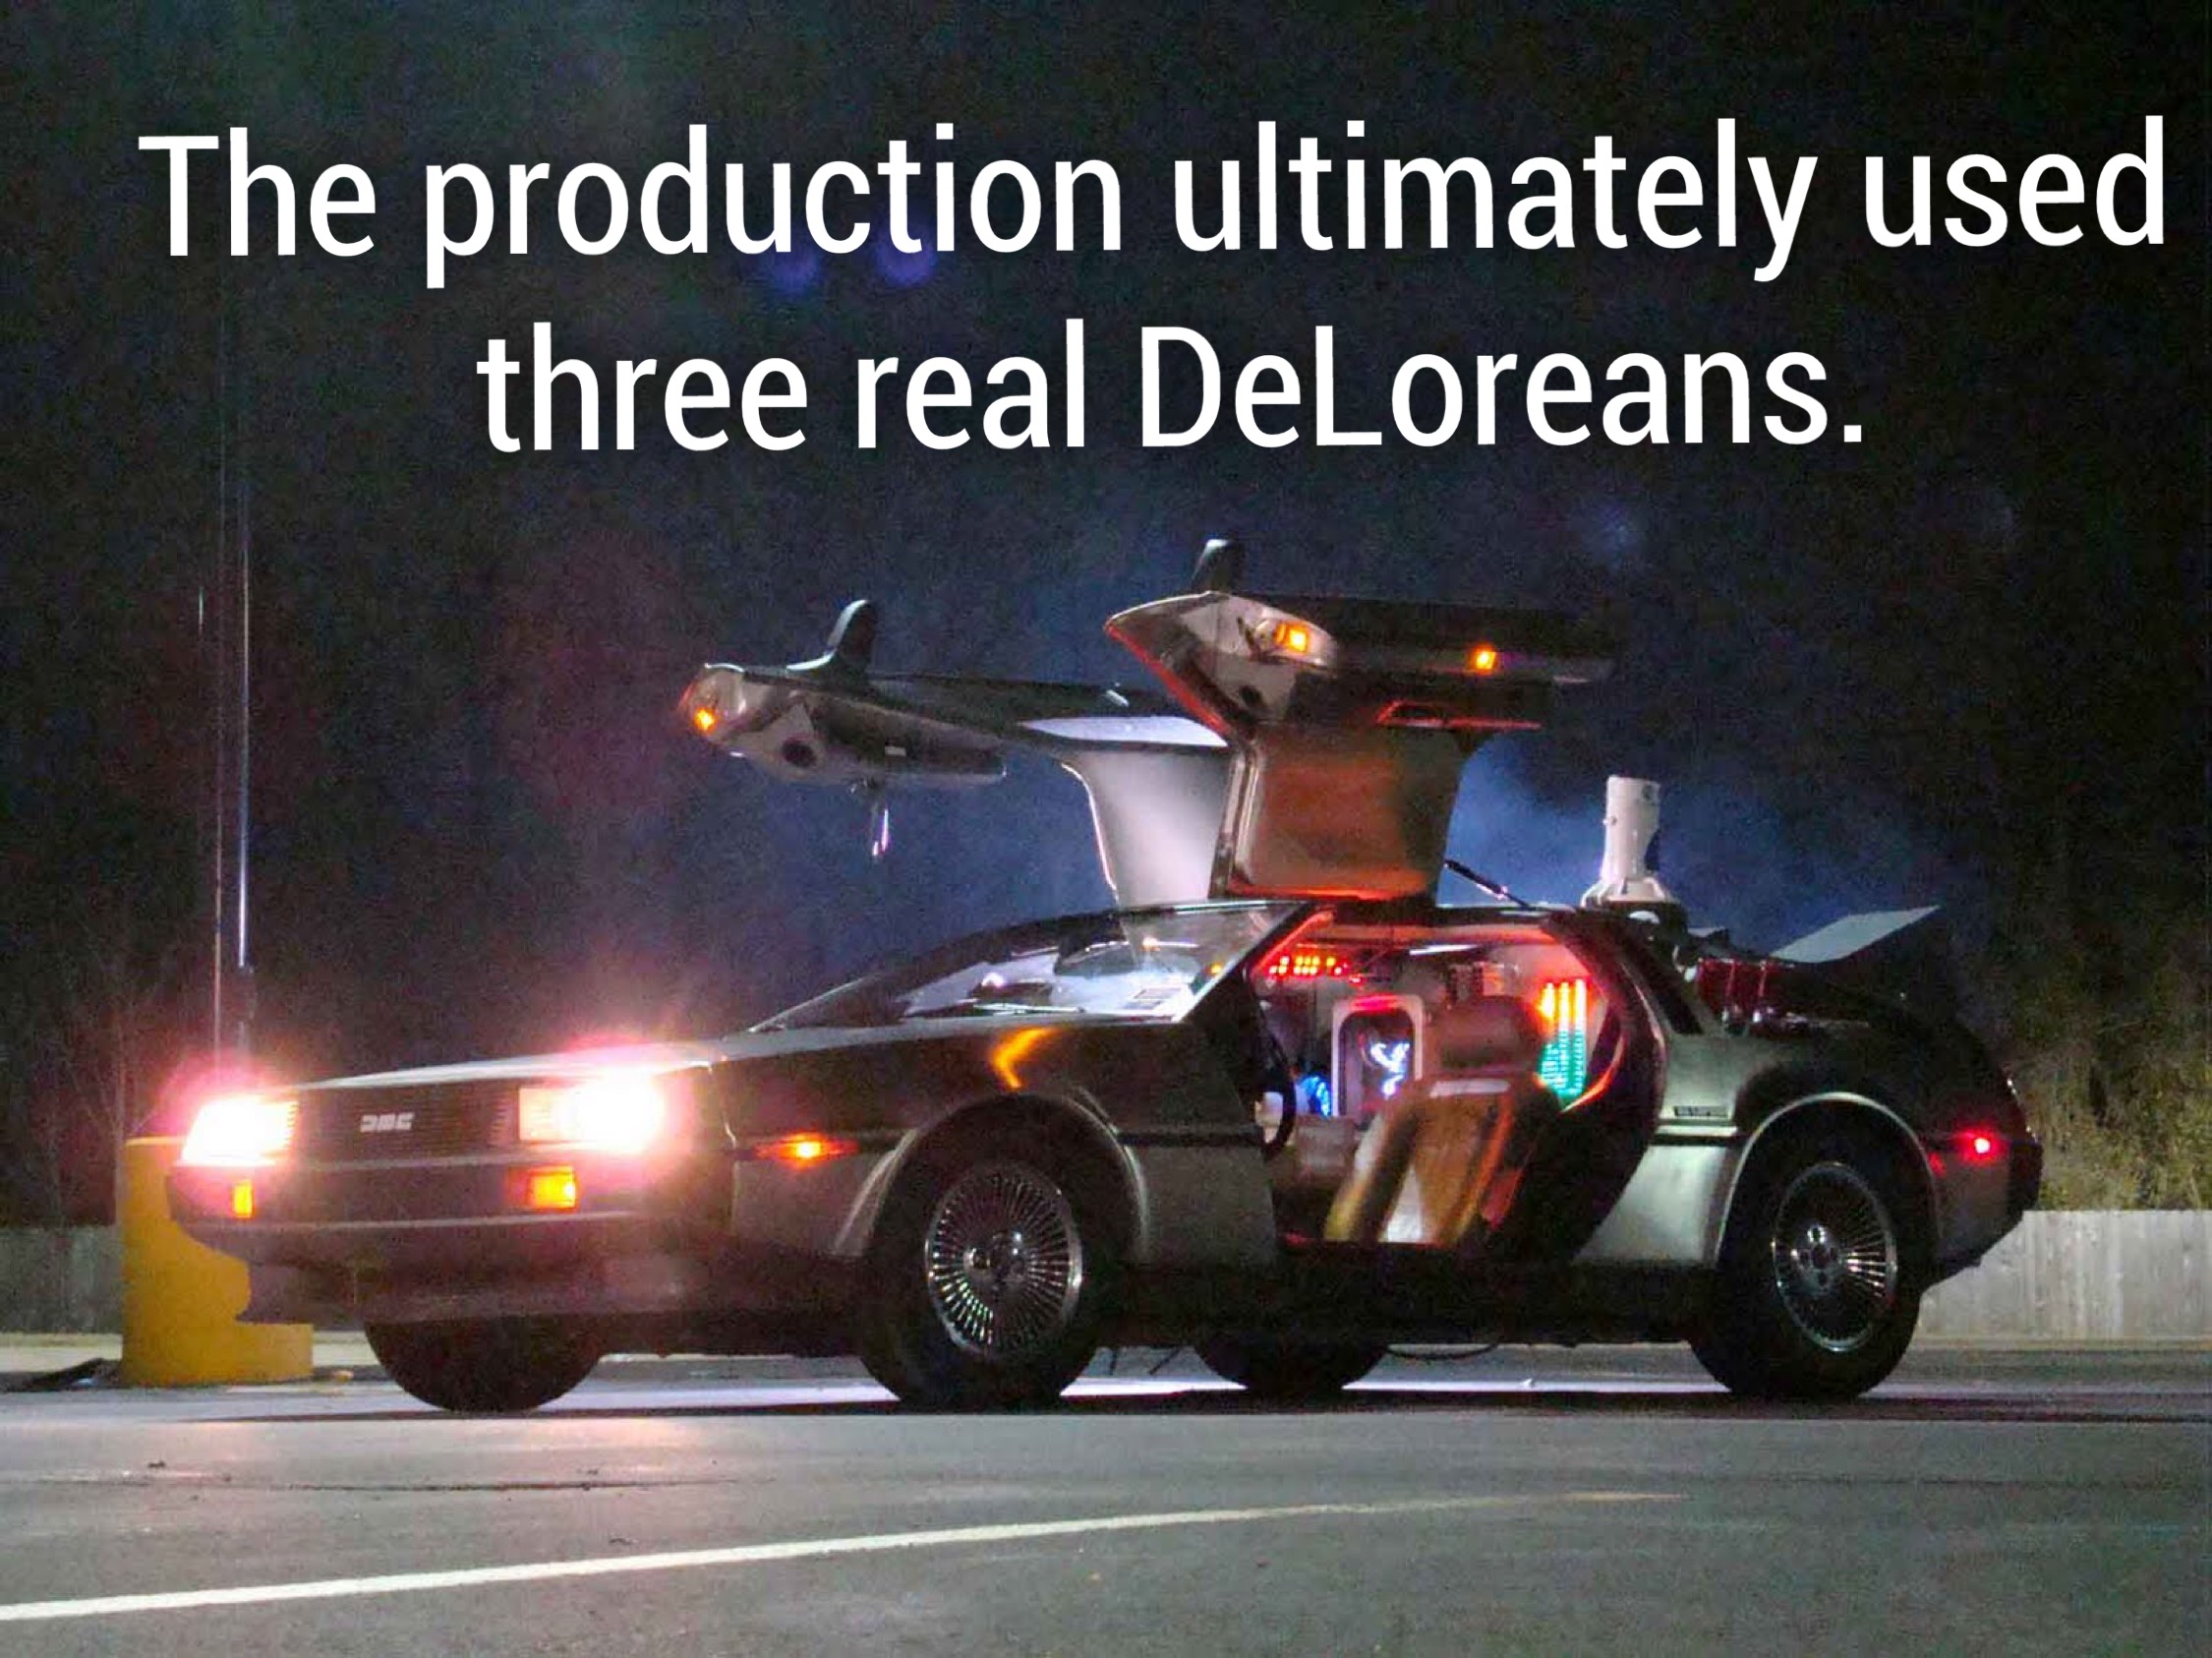 car from back to the future movie - The production ultimately used three real DeLoreans.